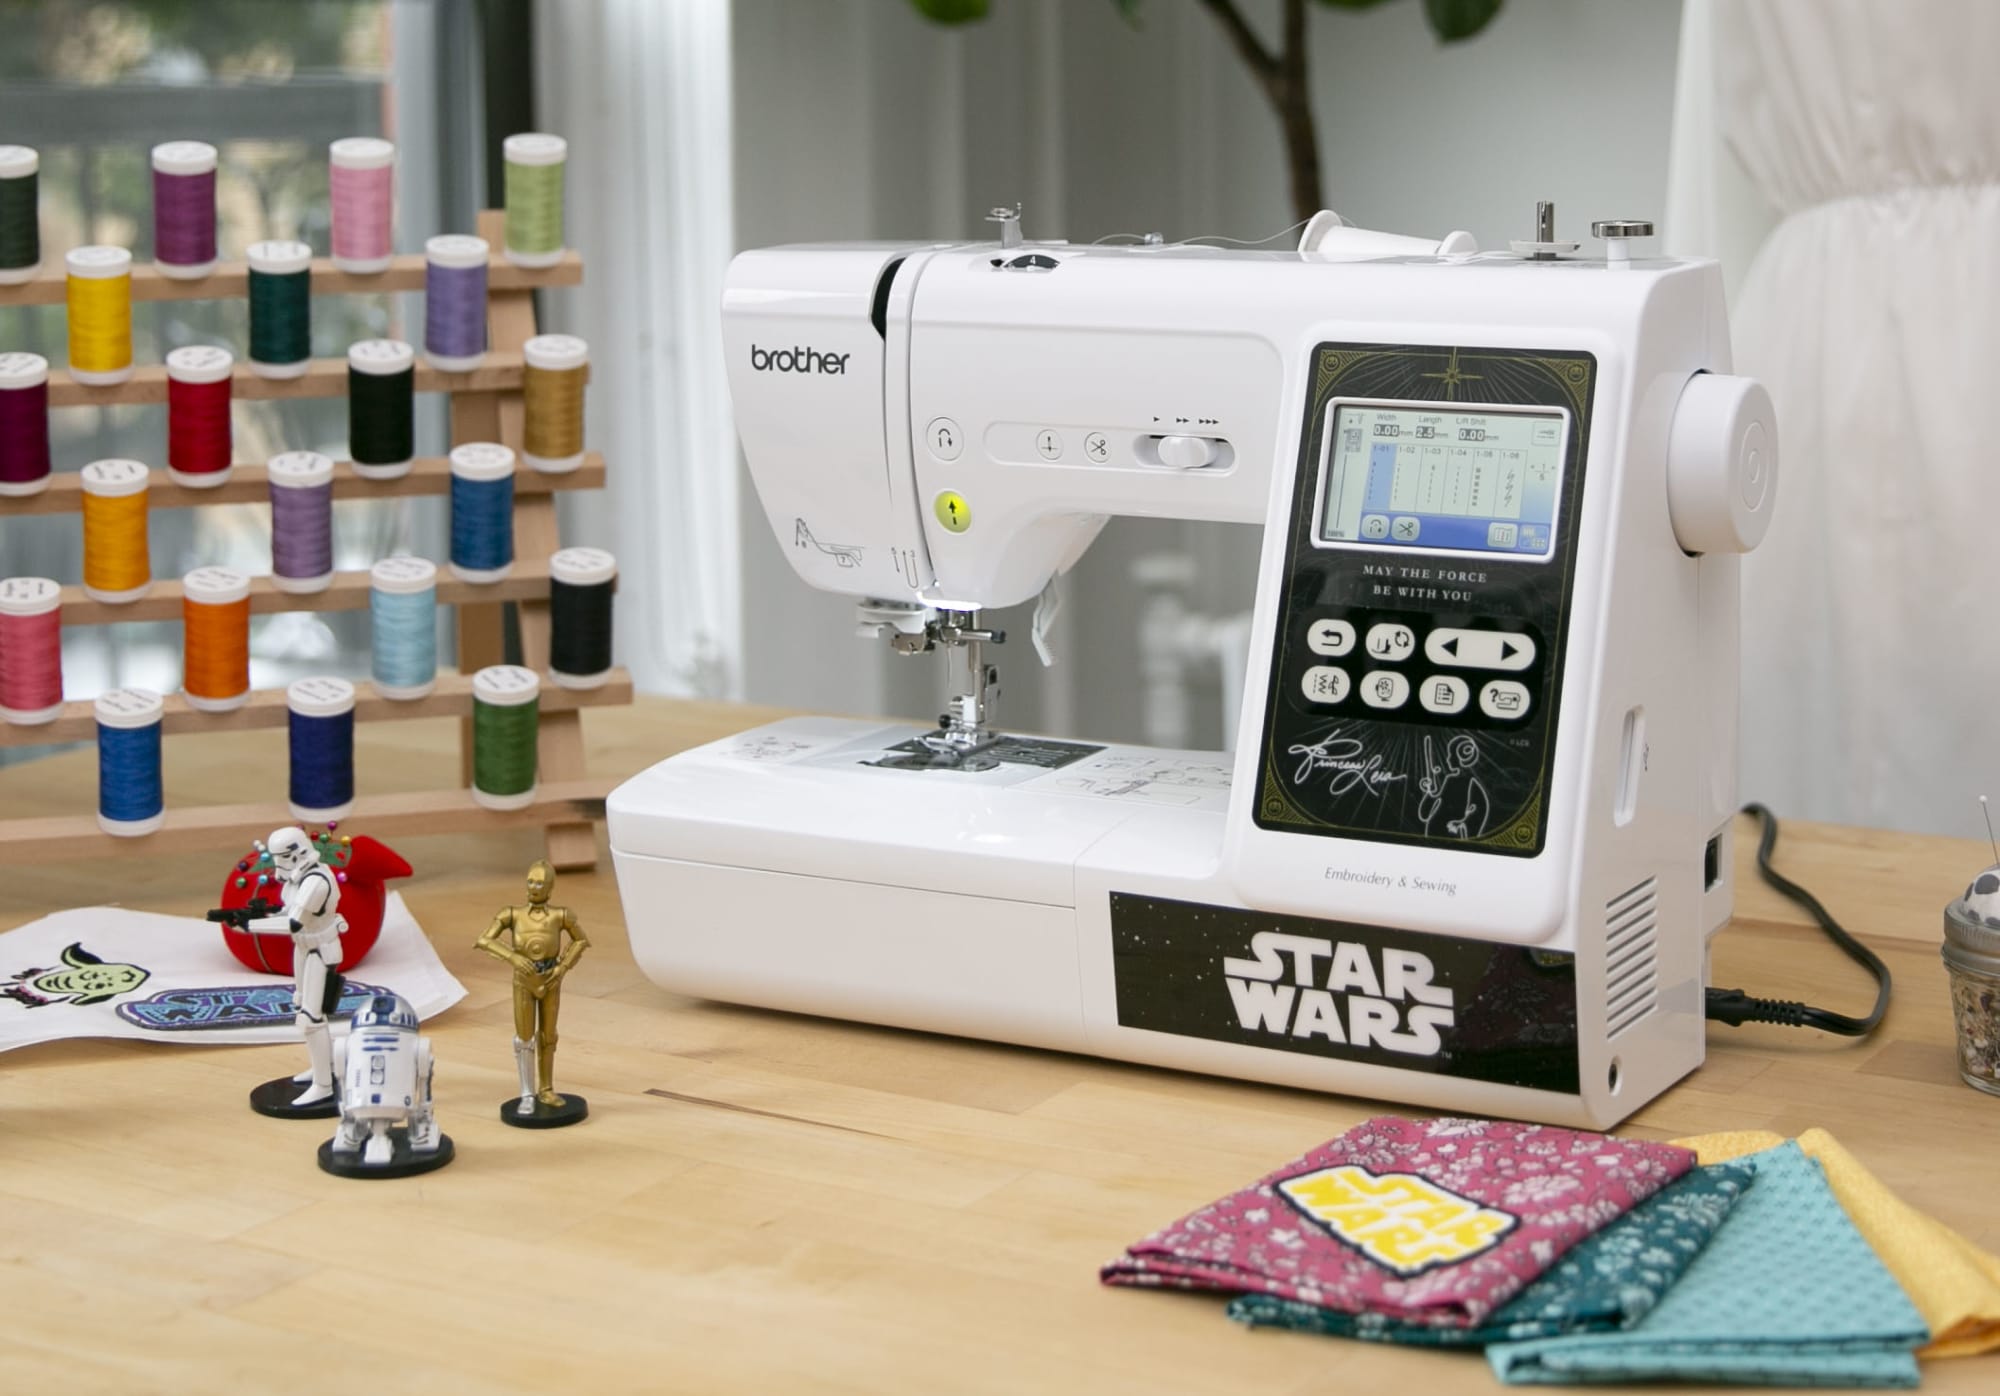 Get crafty with the Brother Star Wars Sewing and Embroidery Machine